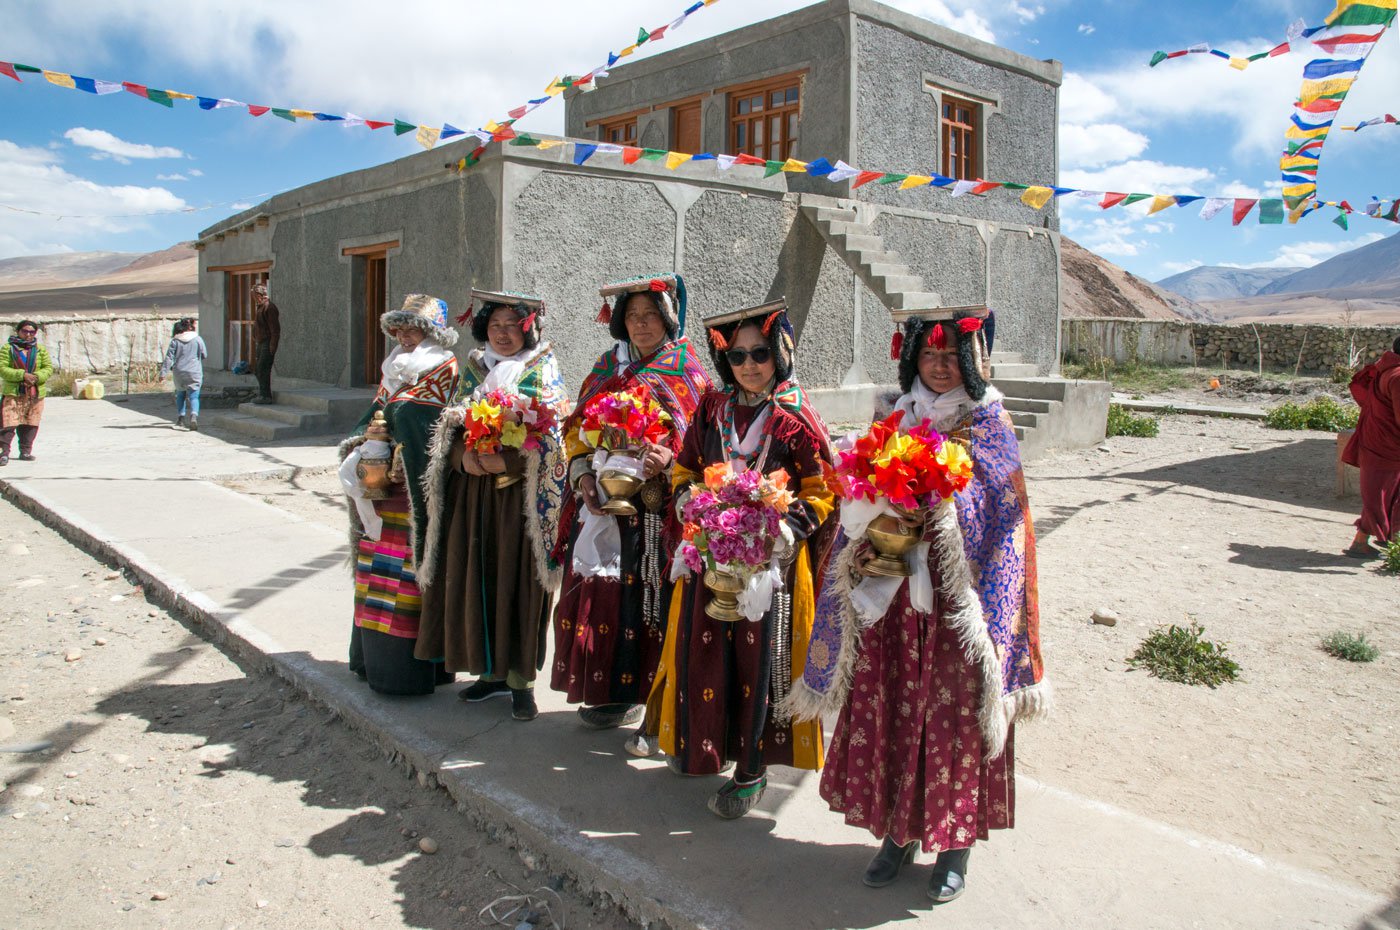 Inside the Punguk Gompa, the women dressed in their traditional attire, wait for the arrival of their friends from Khuldo